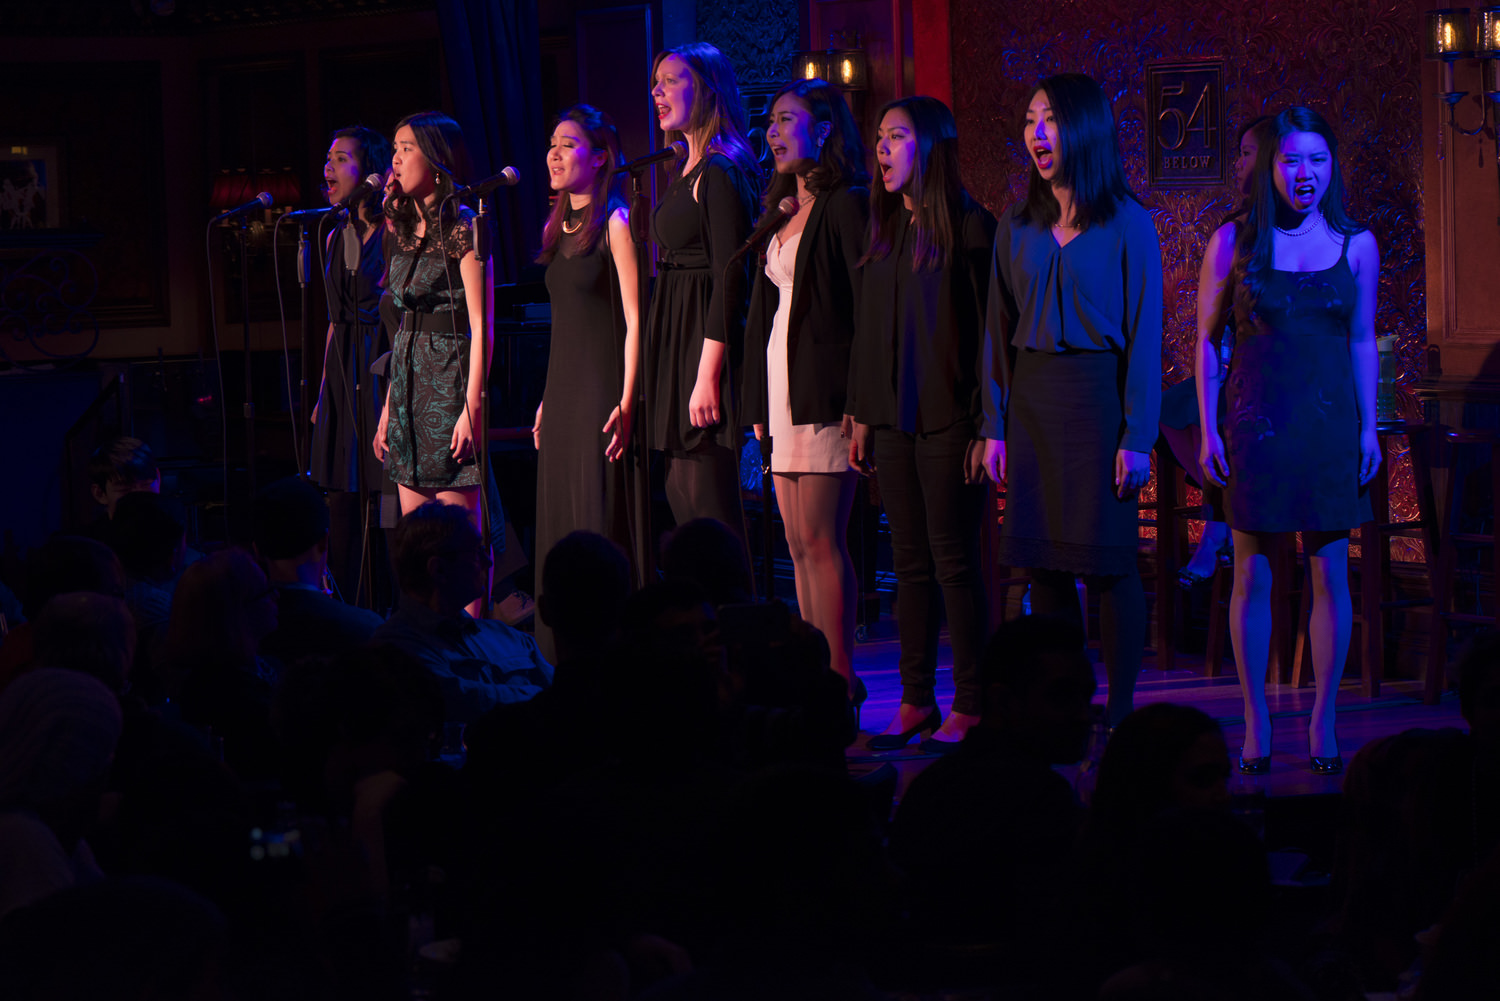 Some of the pictures from 54 Below concert. 5